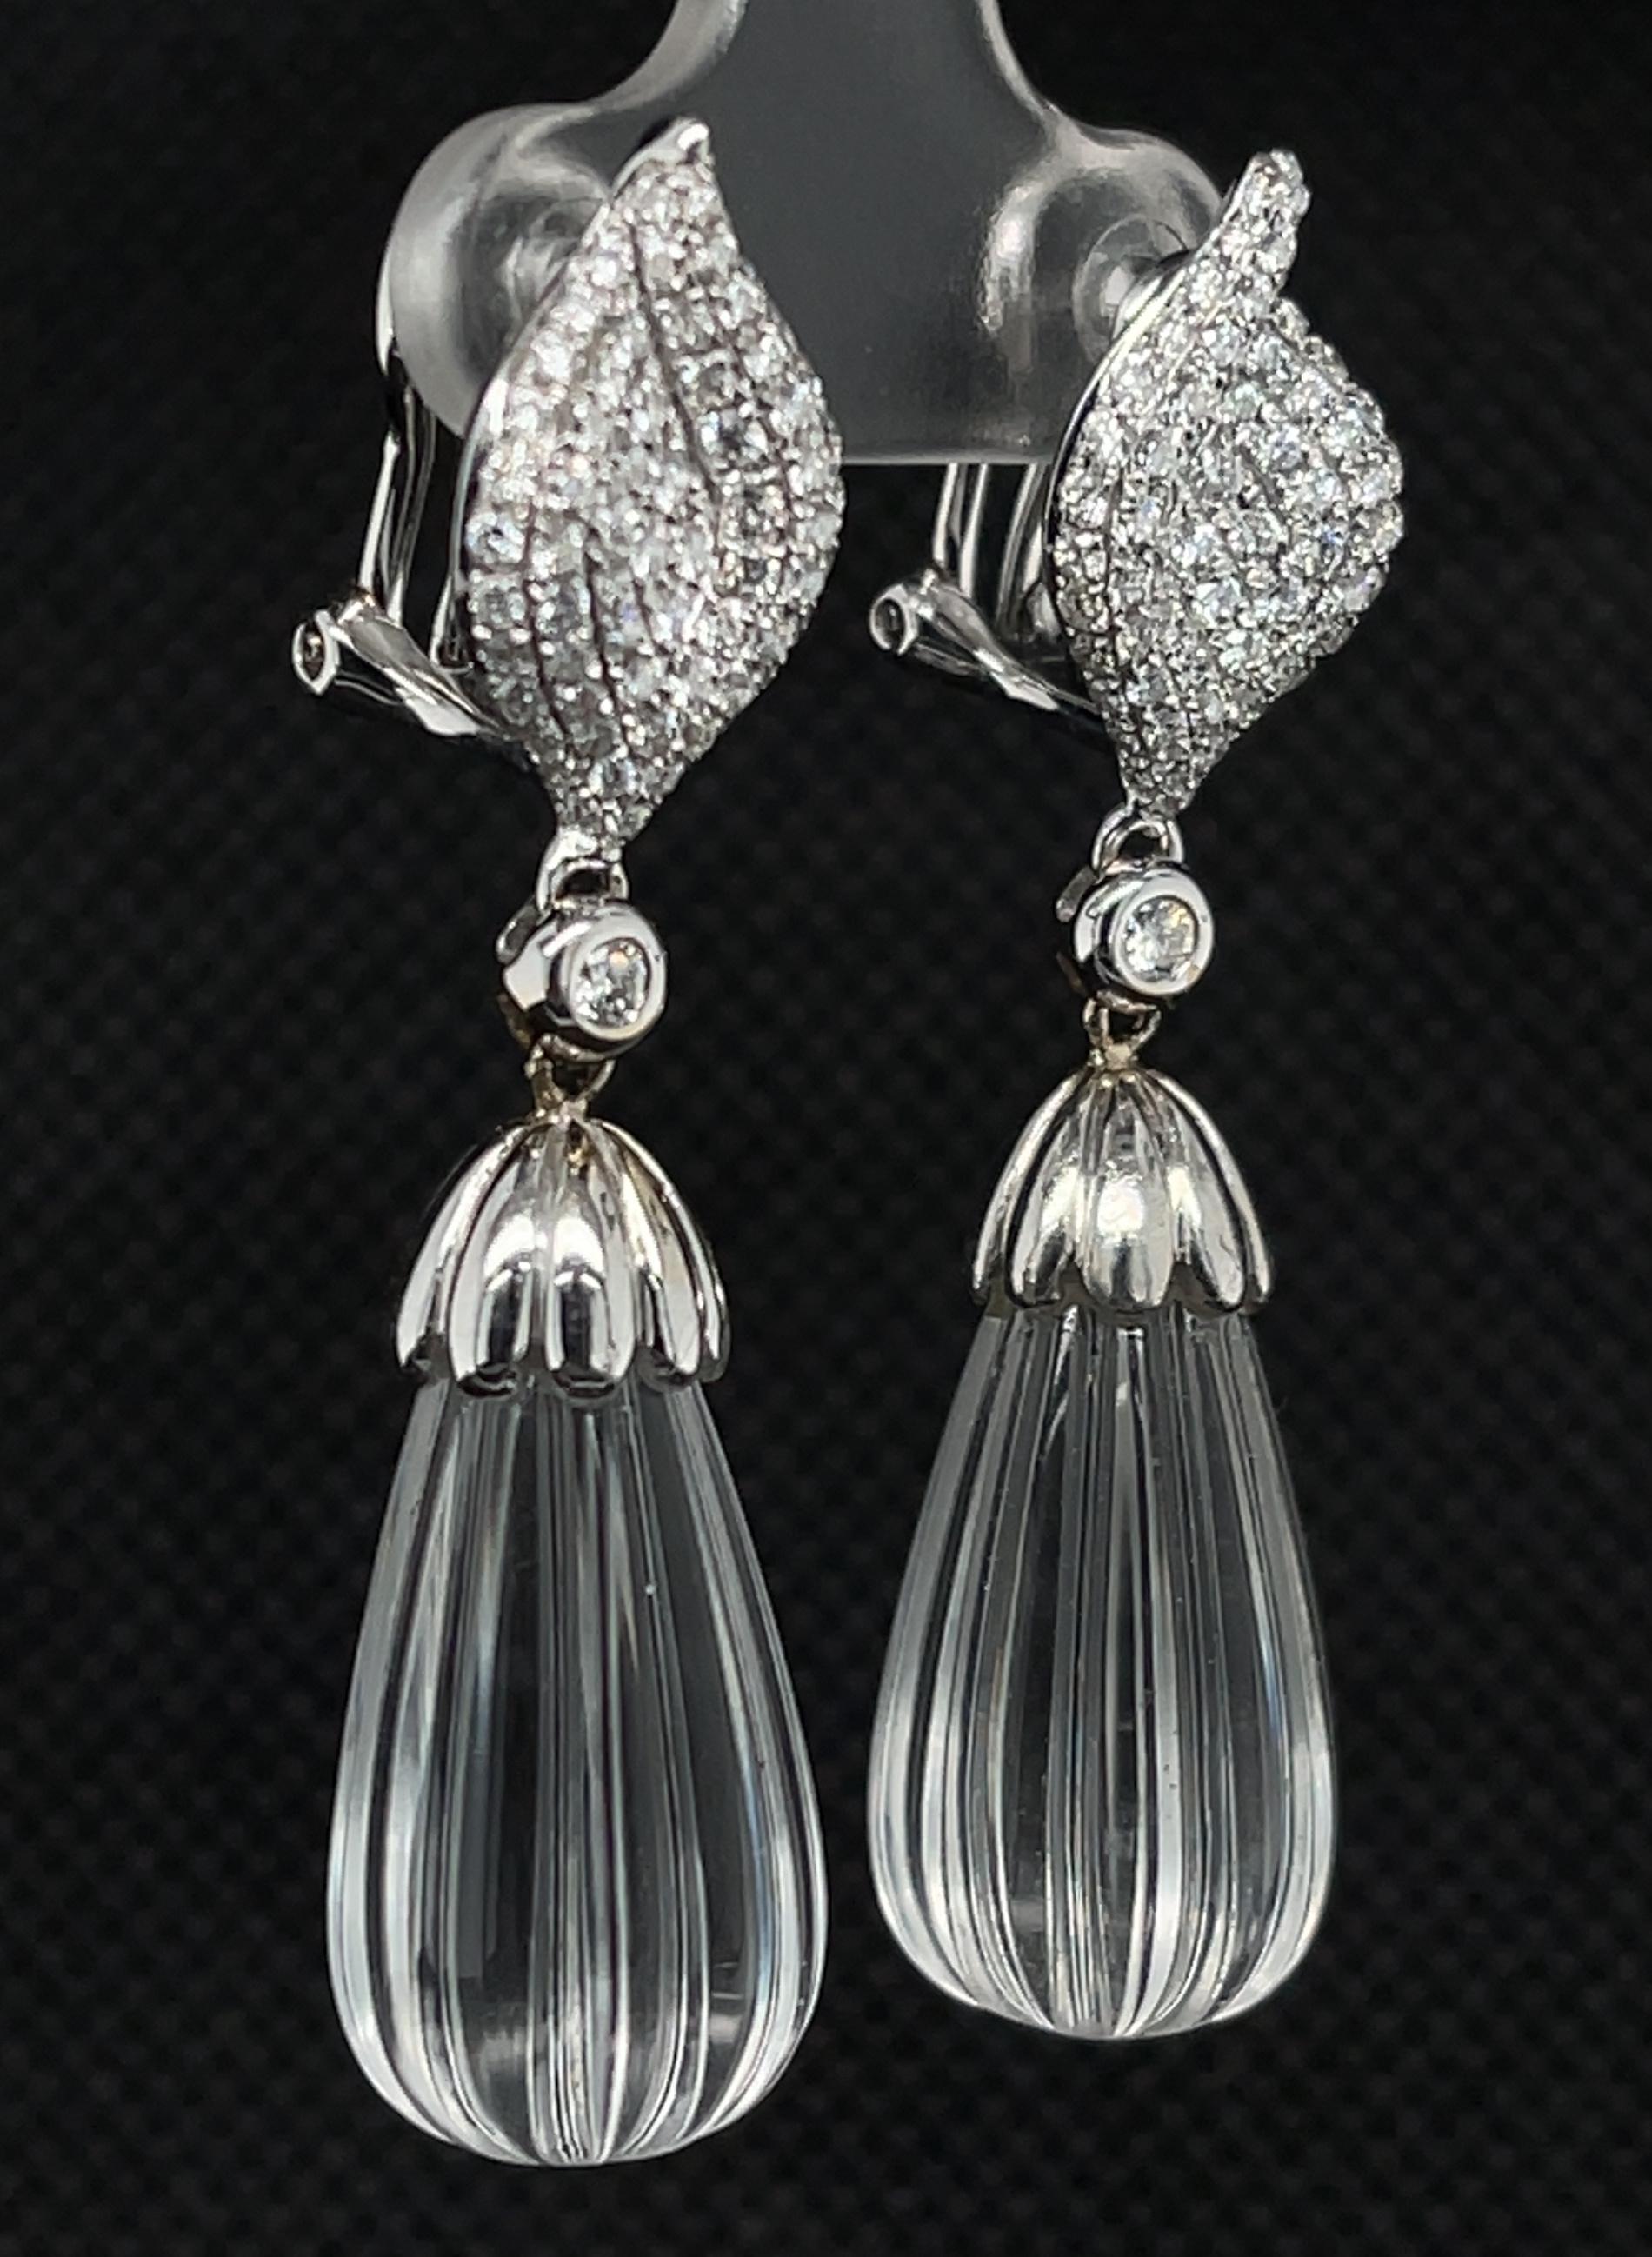 earrings with high neck dress